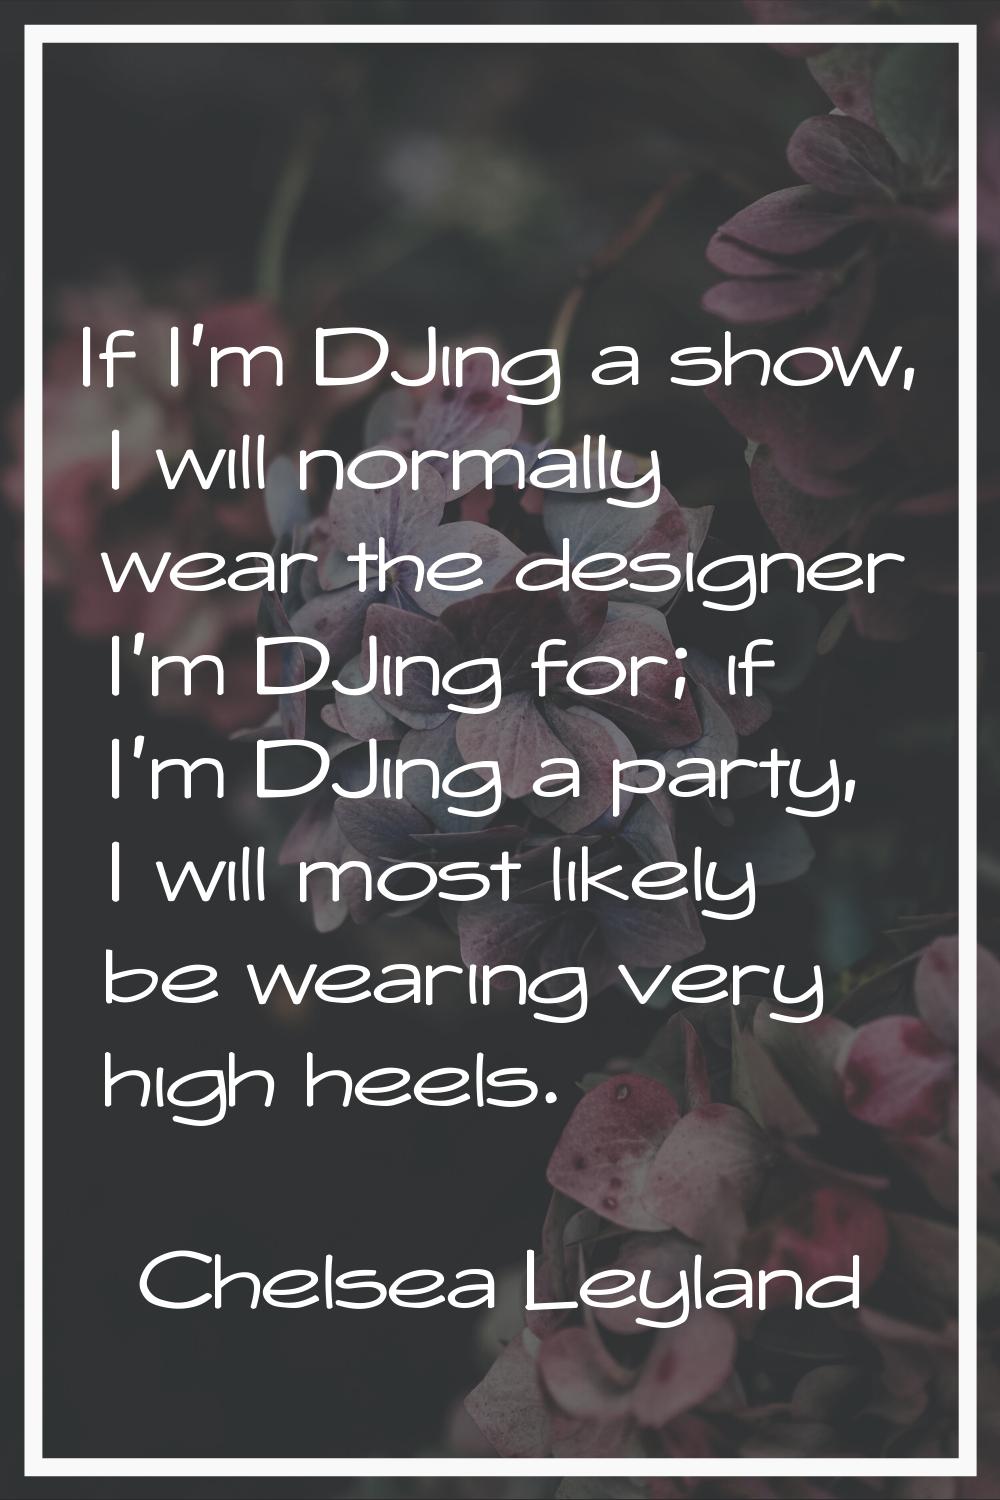 If I'm DJing a show, I will normally wear the designer I'm DJing for; if I'm DJing a party, I will 